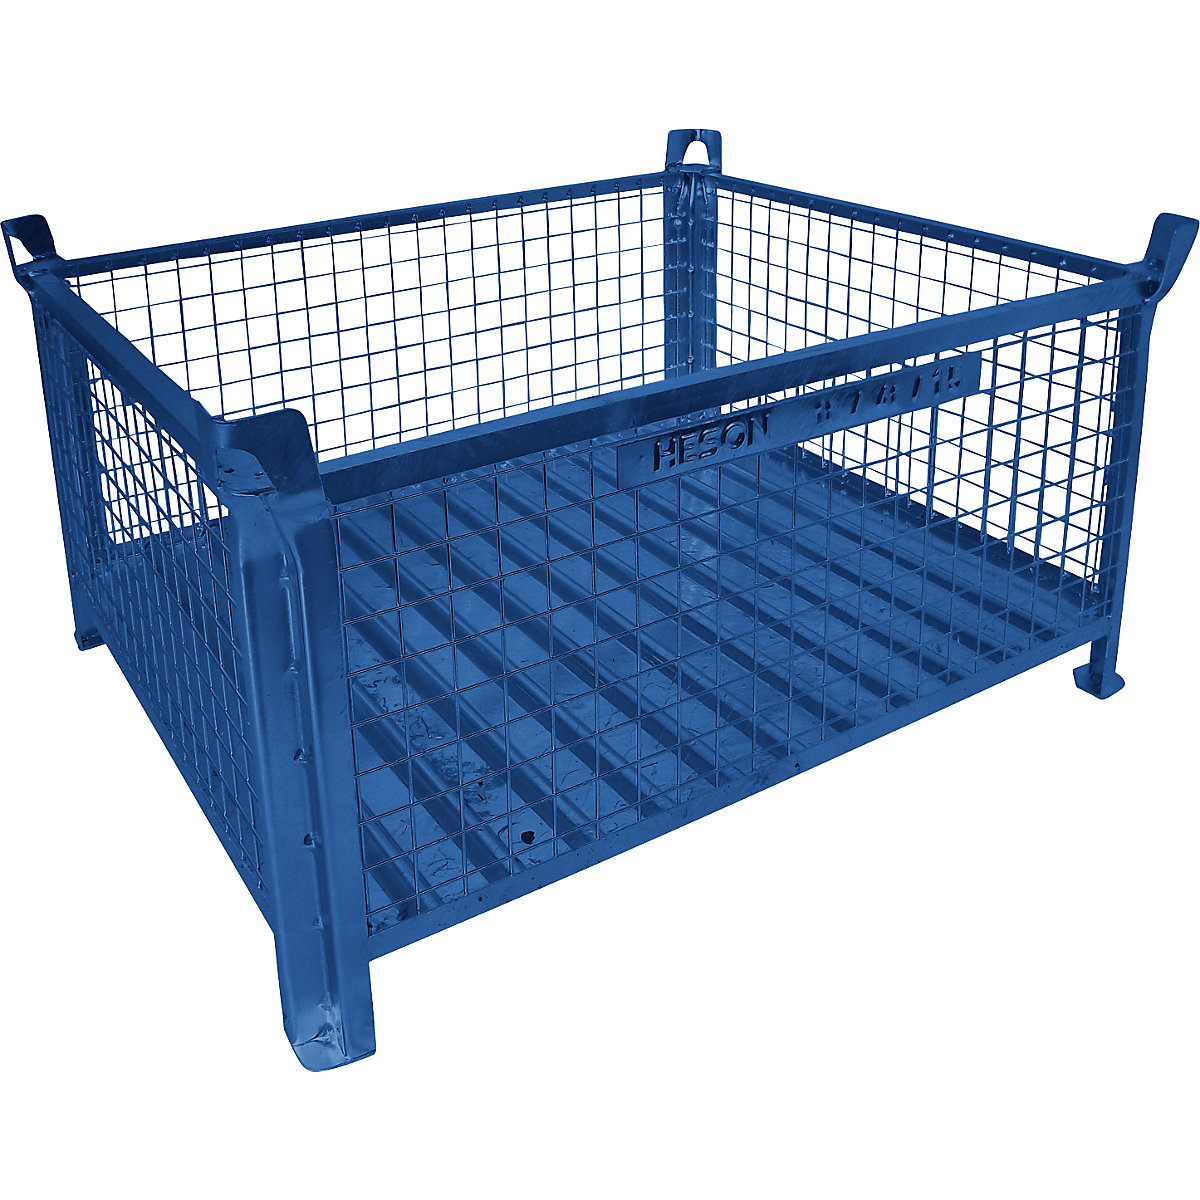 Box pallet with sheet steel base – Heson, LxW 1200 x 1000 mm, painted blue, 10+ items-5